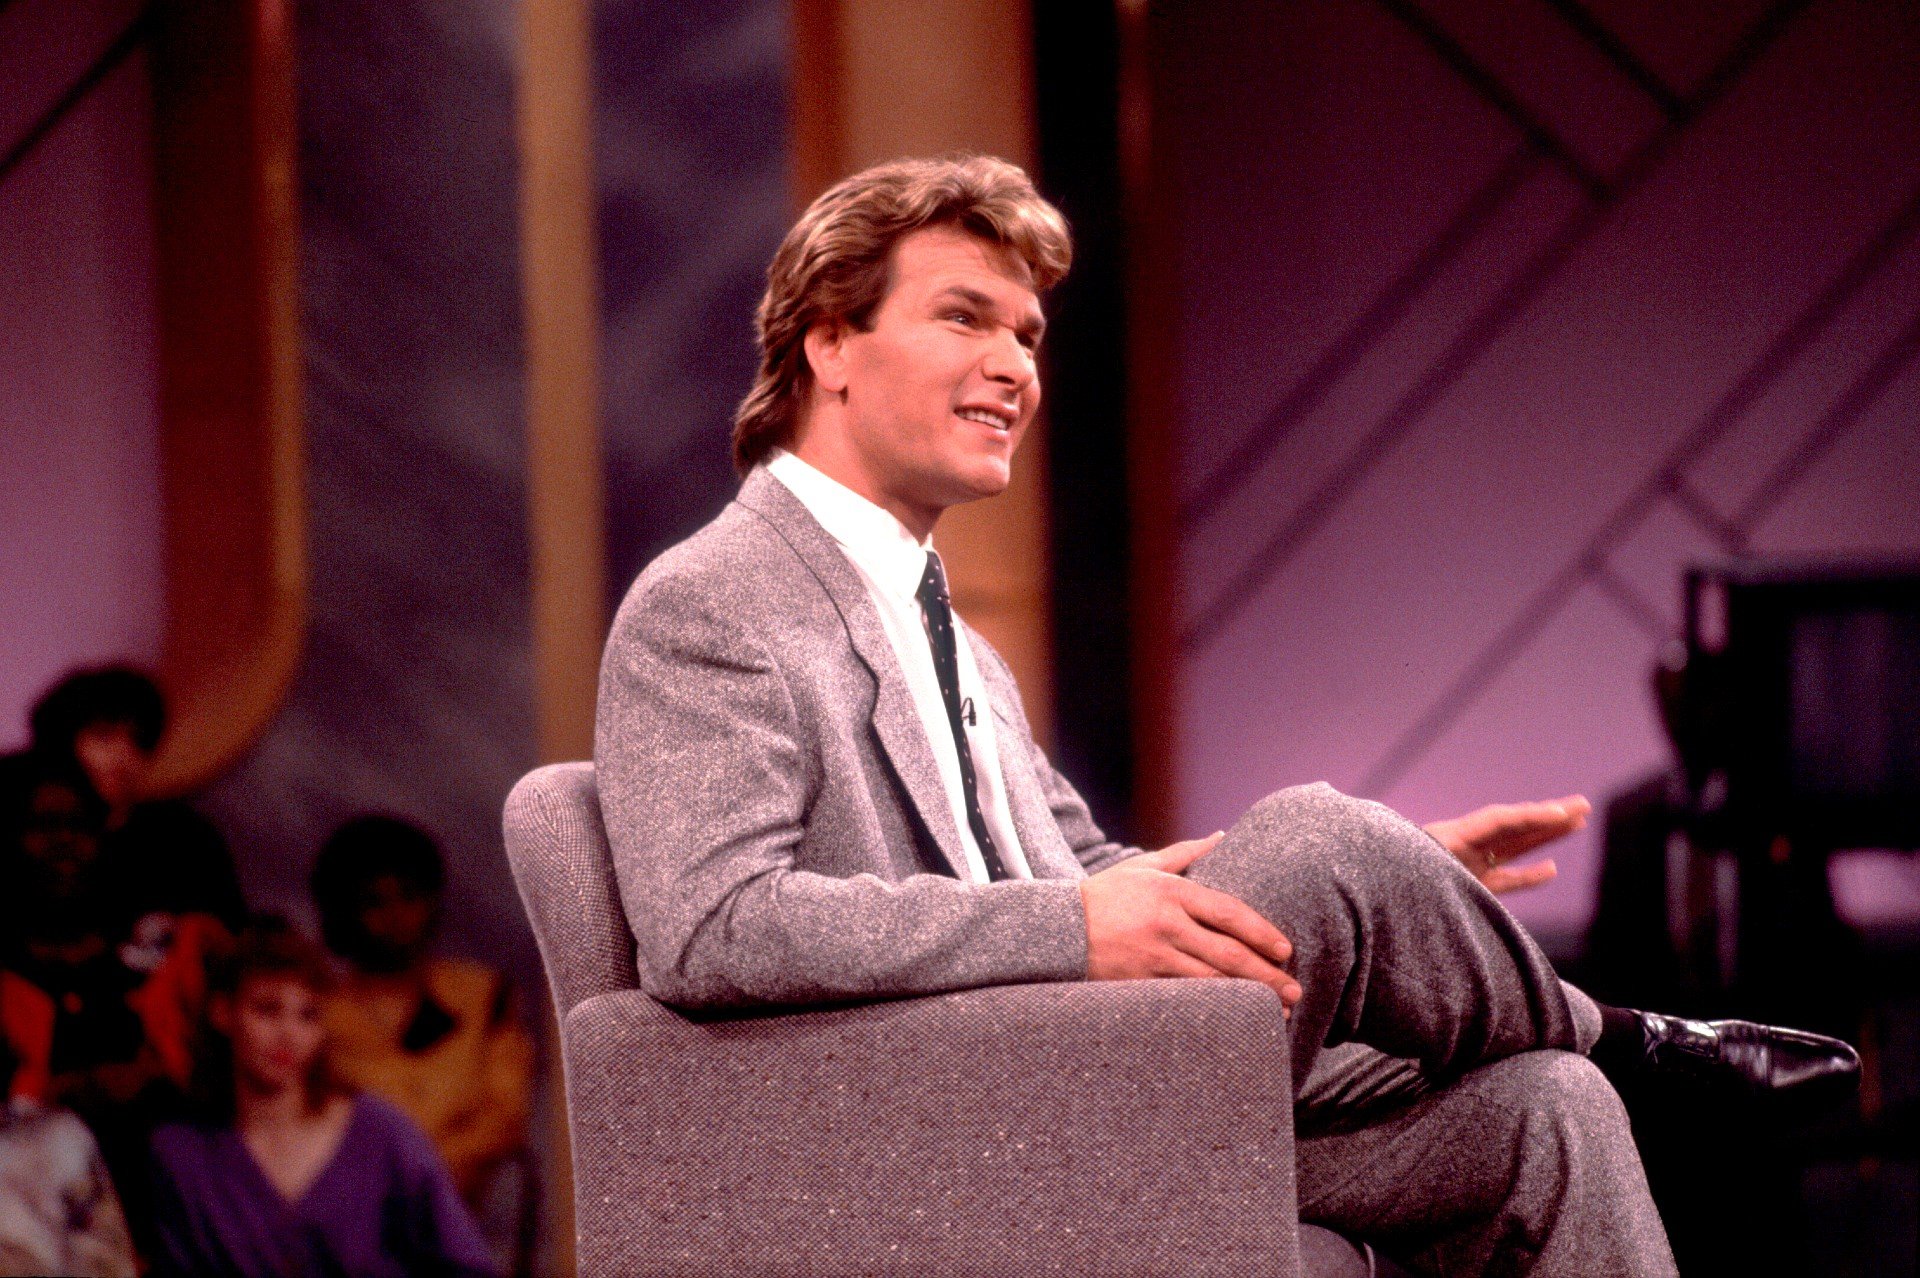 Patrick Swayze sits down for an interview on the Oprah Winfrey Show.